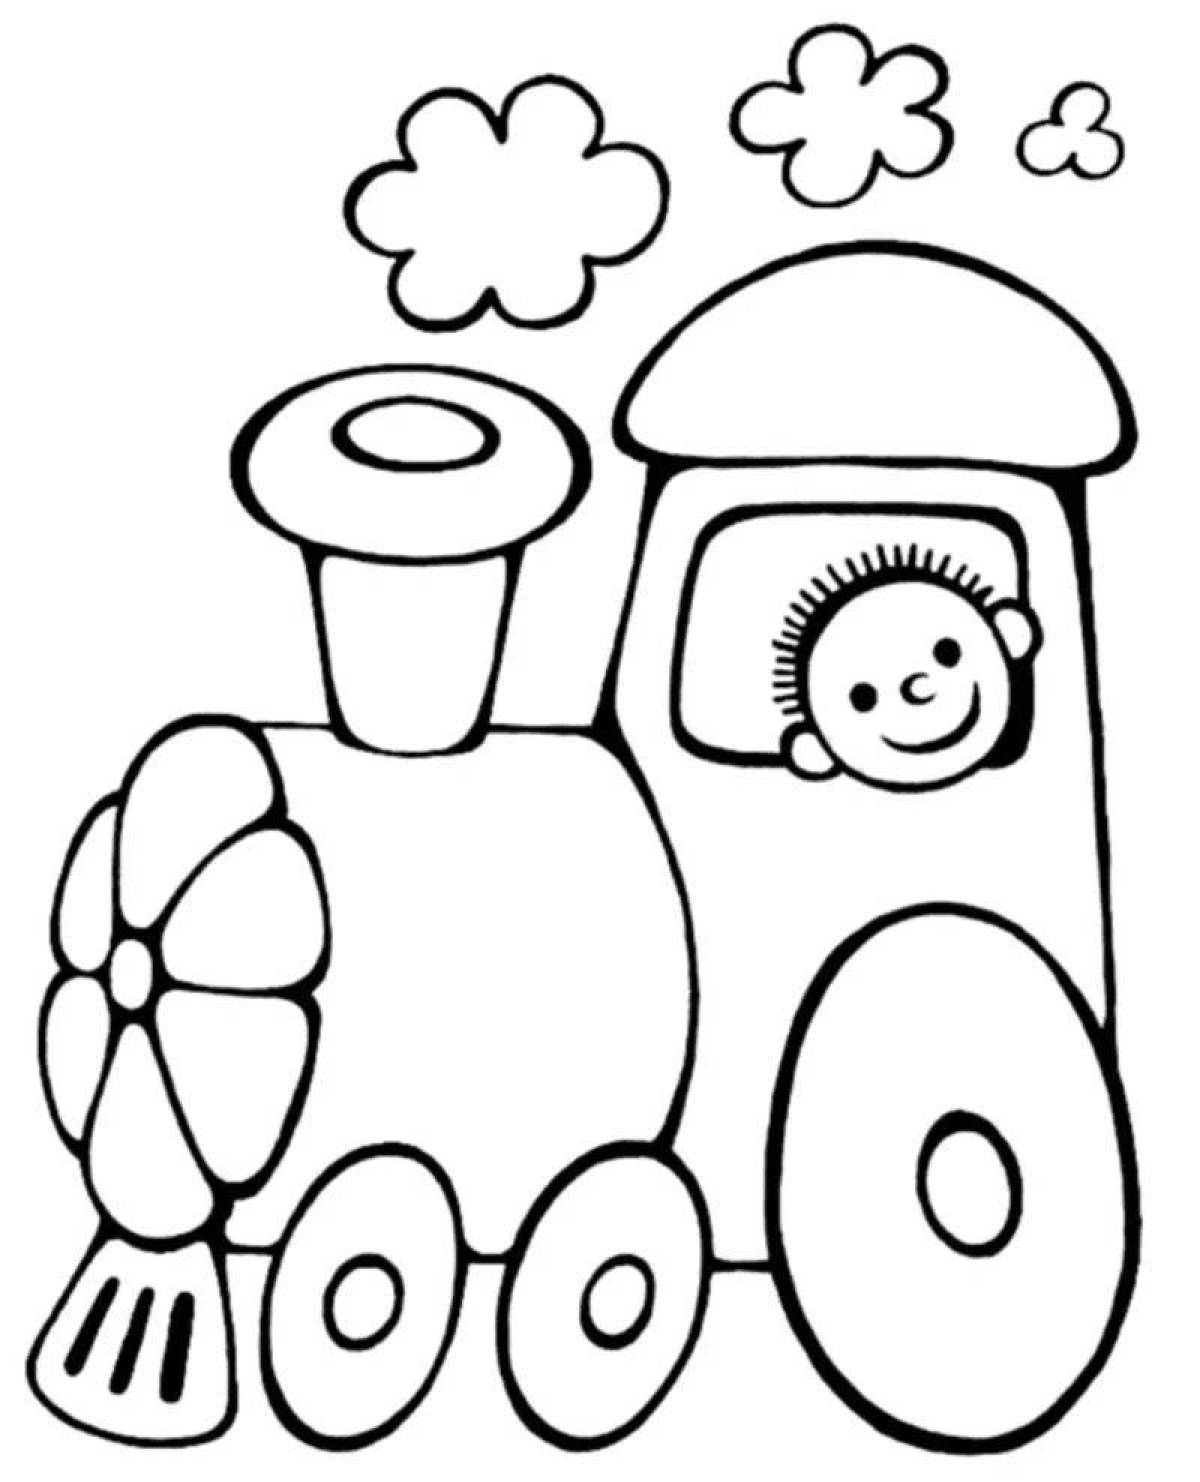 Fun coloring templates for 3 year olds